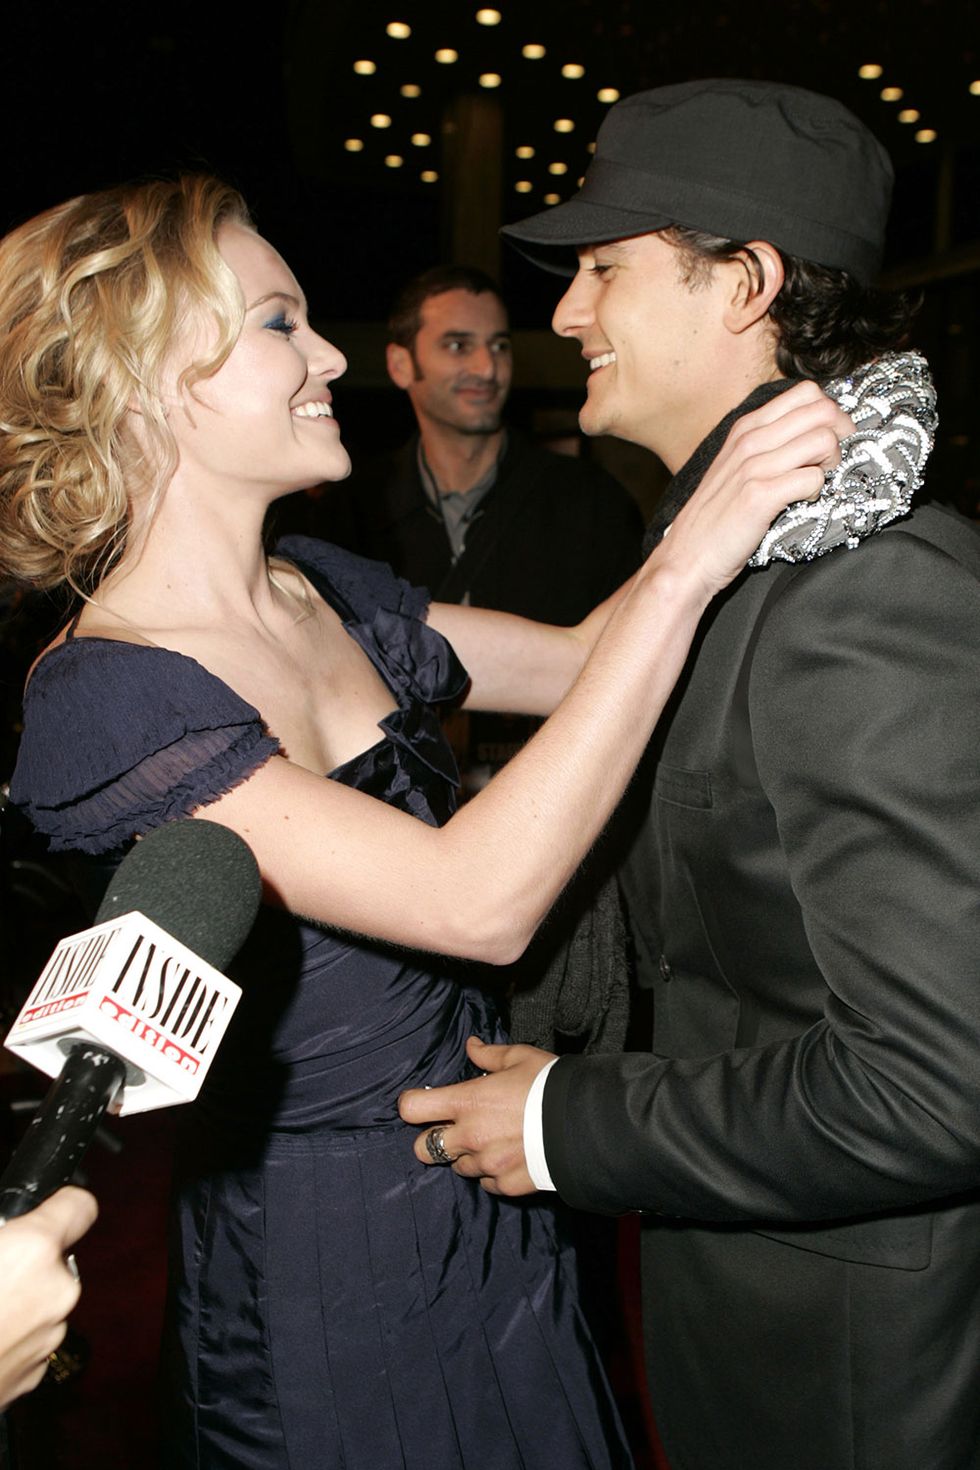 <p>Kate and Orlando dated off and on from 2002 to 2006 after meeting during a shoot for a Gap ad. In 2011, Kate <a href="http://www.nydailynews.com/entertainment/gossip/kate-bosworth-pain-orlando-bloom-breakup-gave-vertigo-article-1.964312" target="_blank">said</a> that the breakup was so painful she felt like she had vertigo.</p>